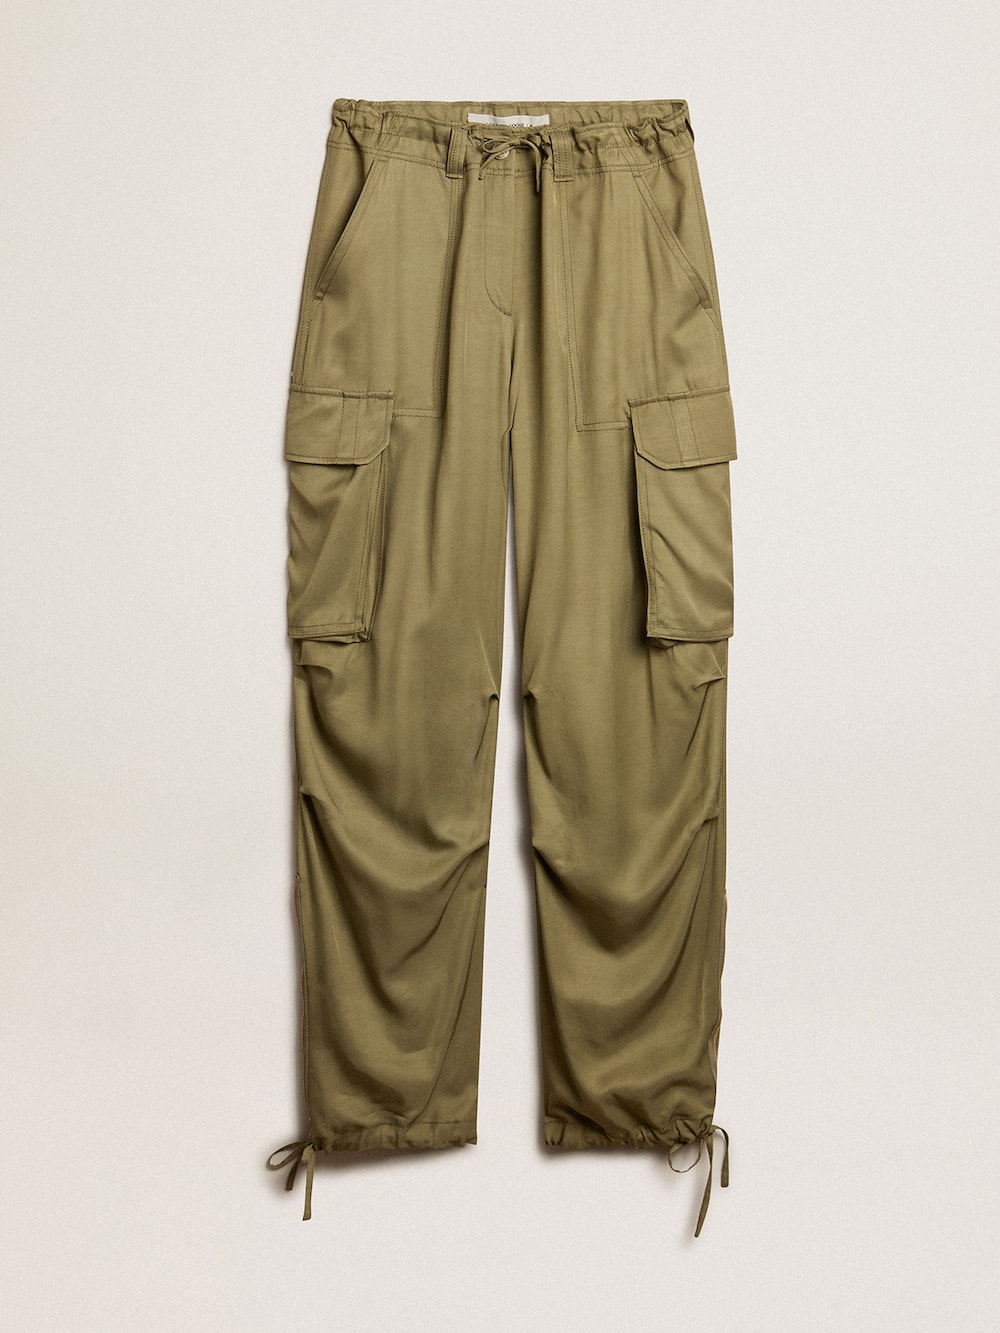 Golden Goose - Women’s olive-colored viscose cargo pants in 